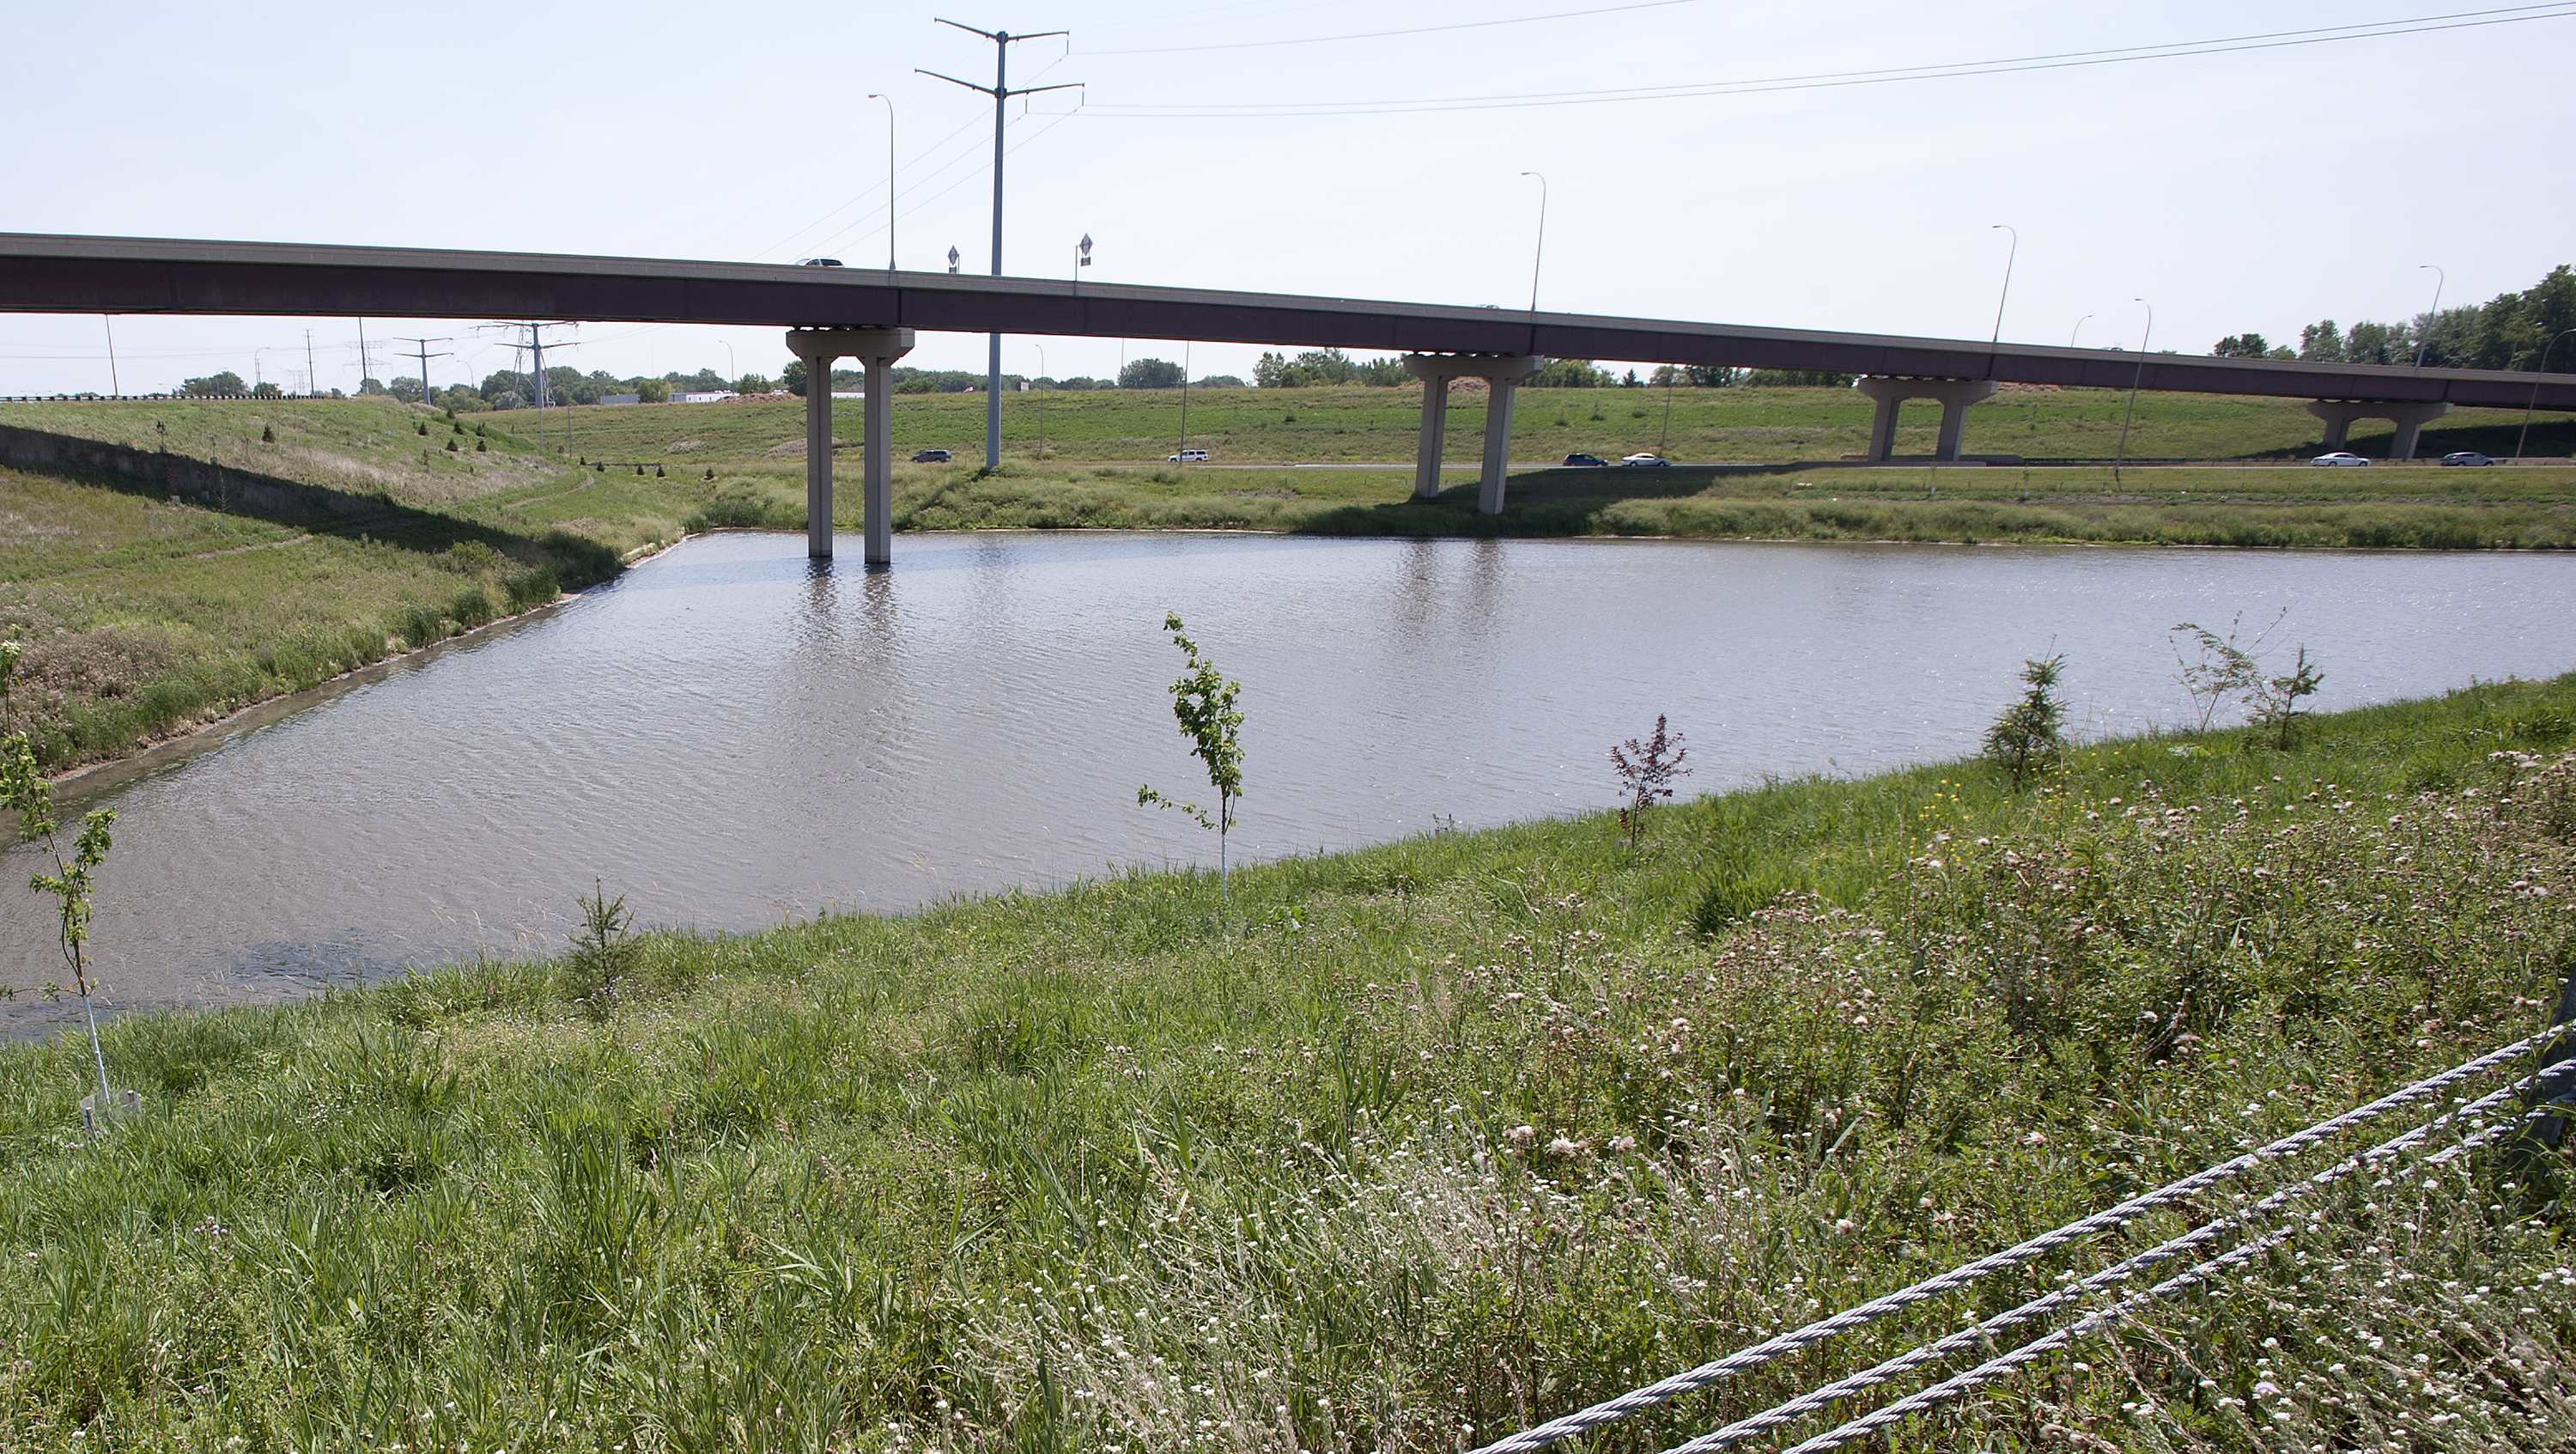 Managing Stormwater in a Changing Climate Will Require Updates to
Minnesota’s Infrastructure